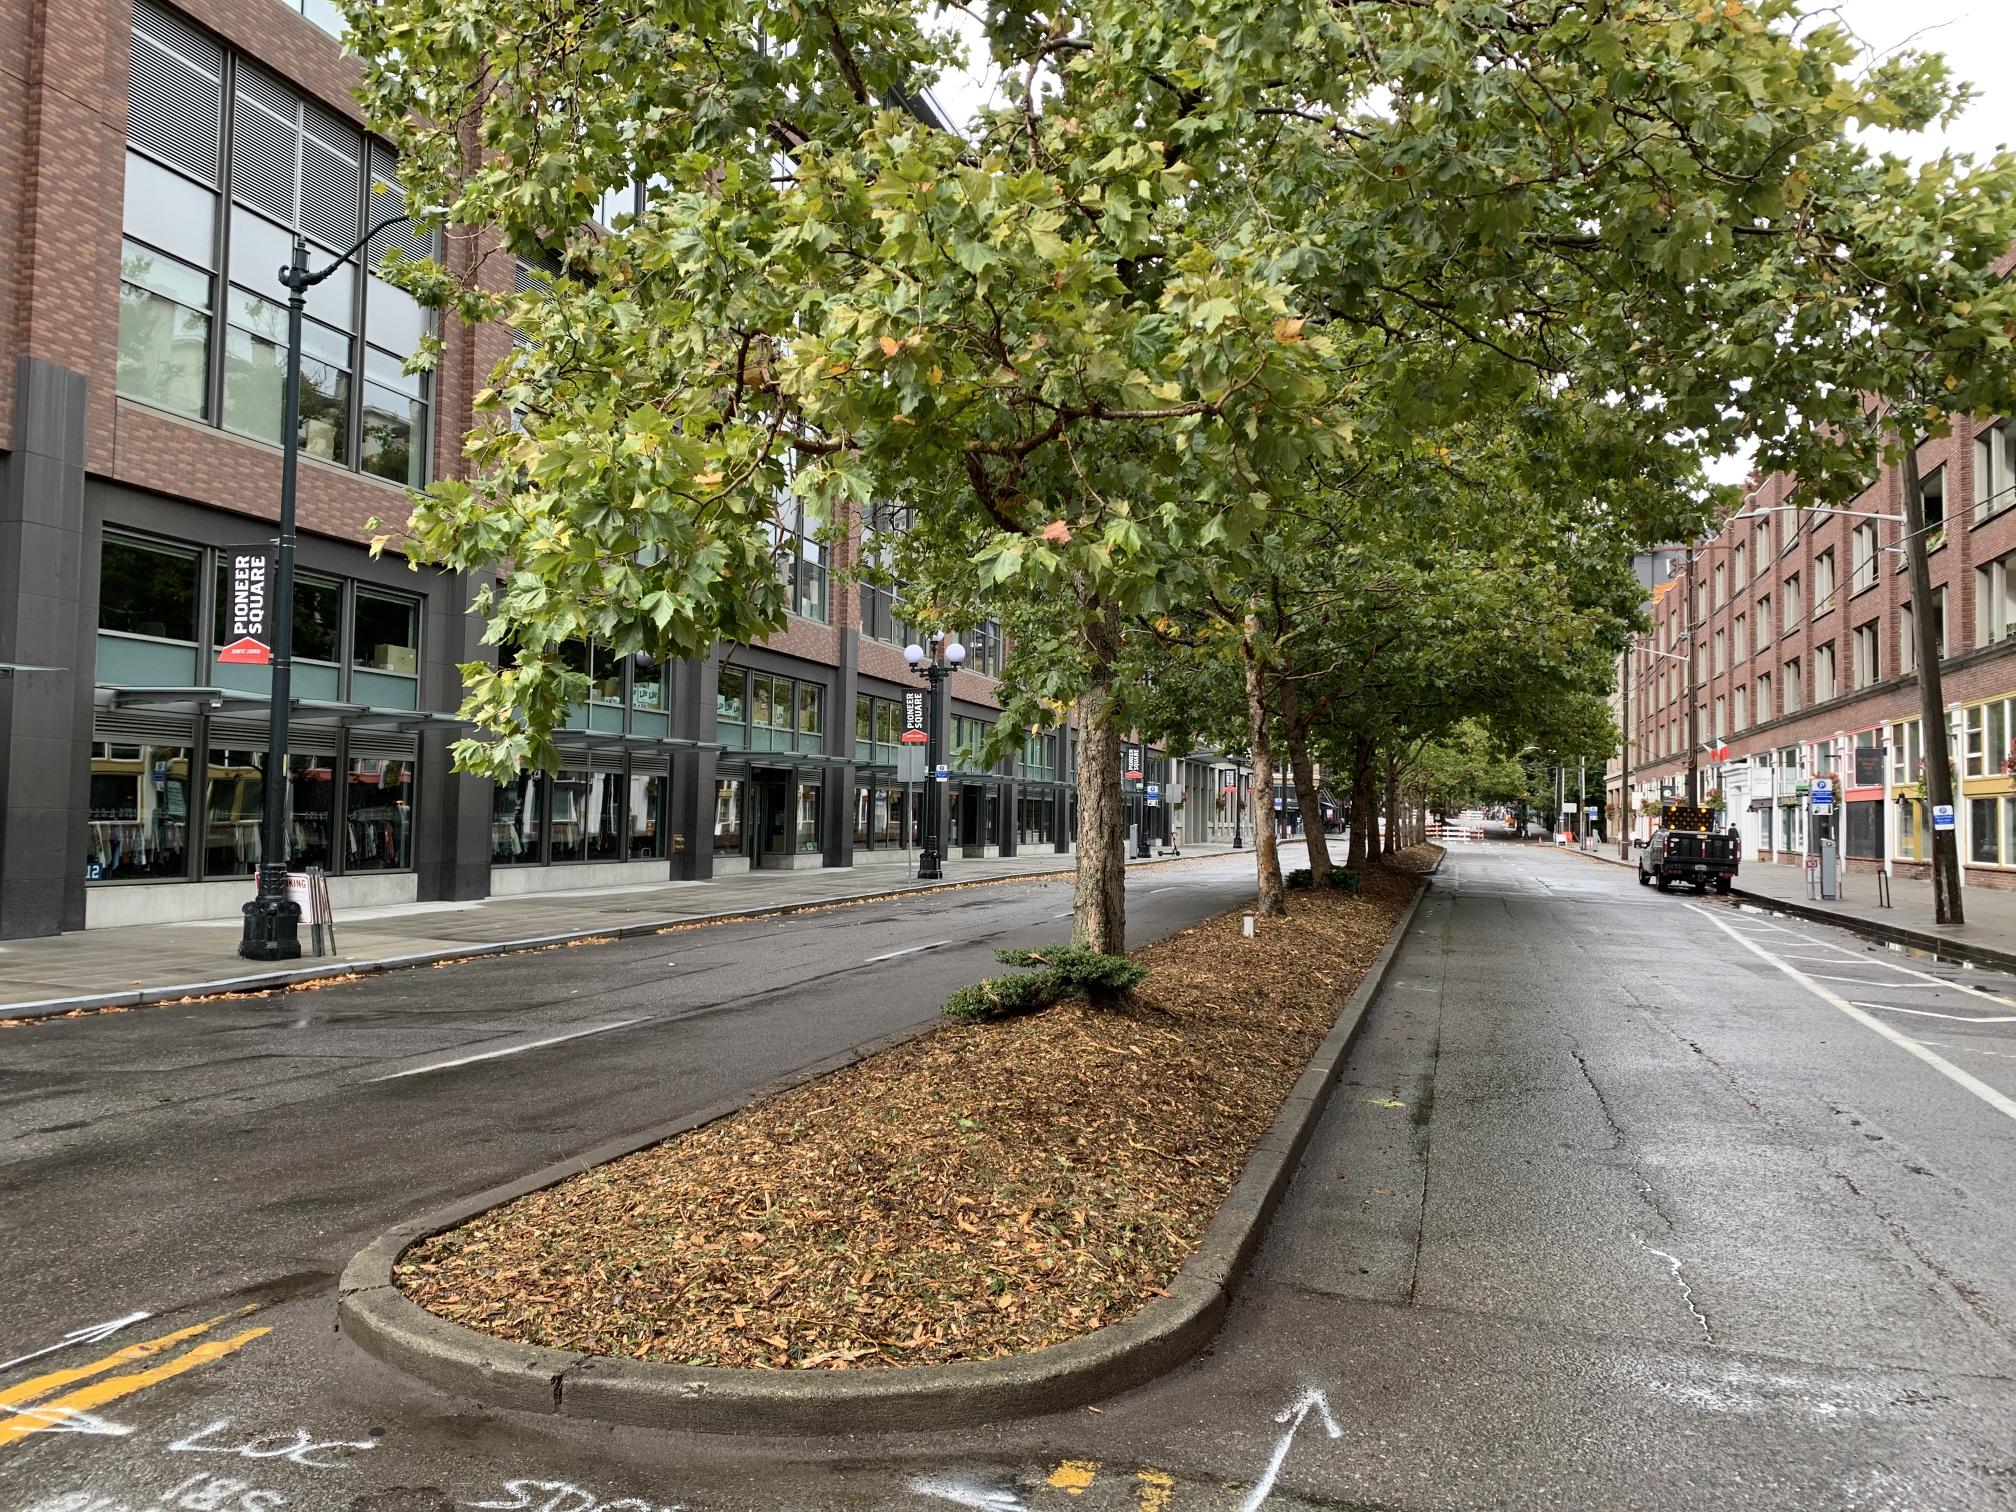 A roadway median with mulch woodchips and several trees sits at the center of 1st Ave S in Seattle's Pioneer Square neighborhood. Roadway, sidewalks, and large buildings are visible on both sides of the median.